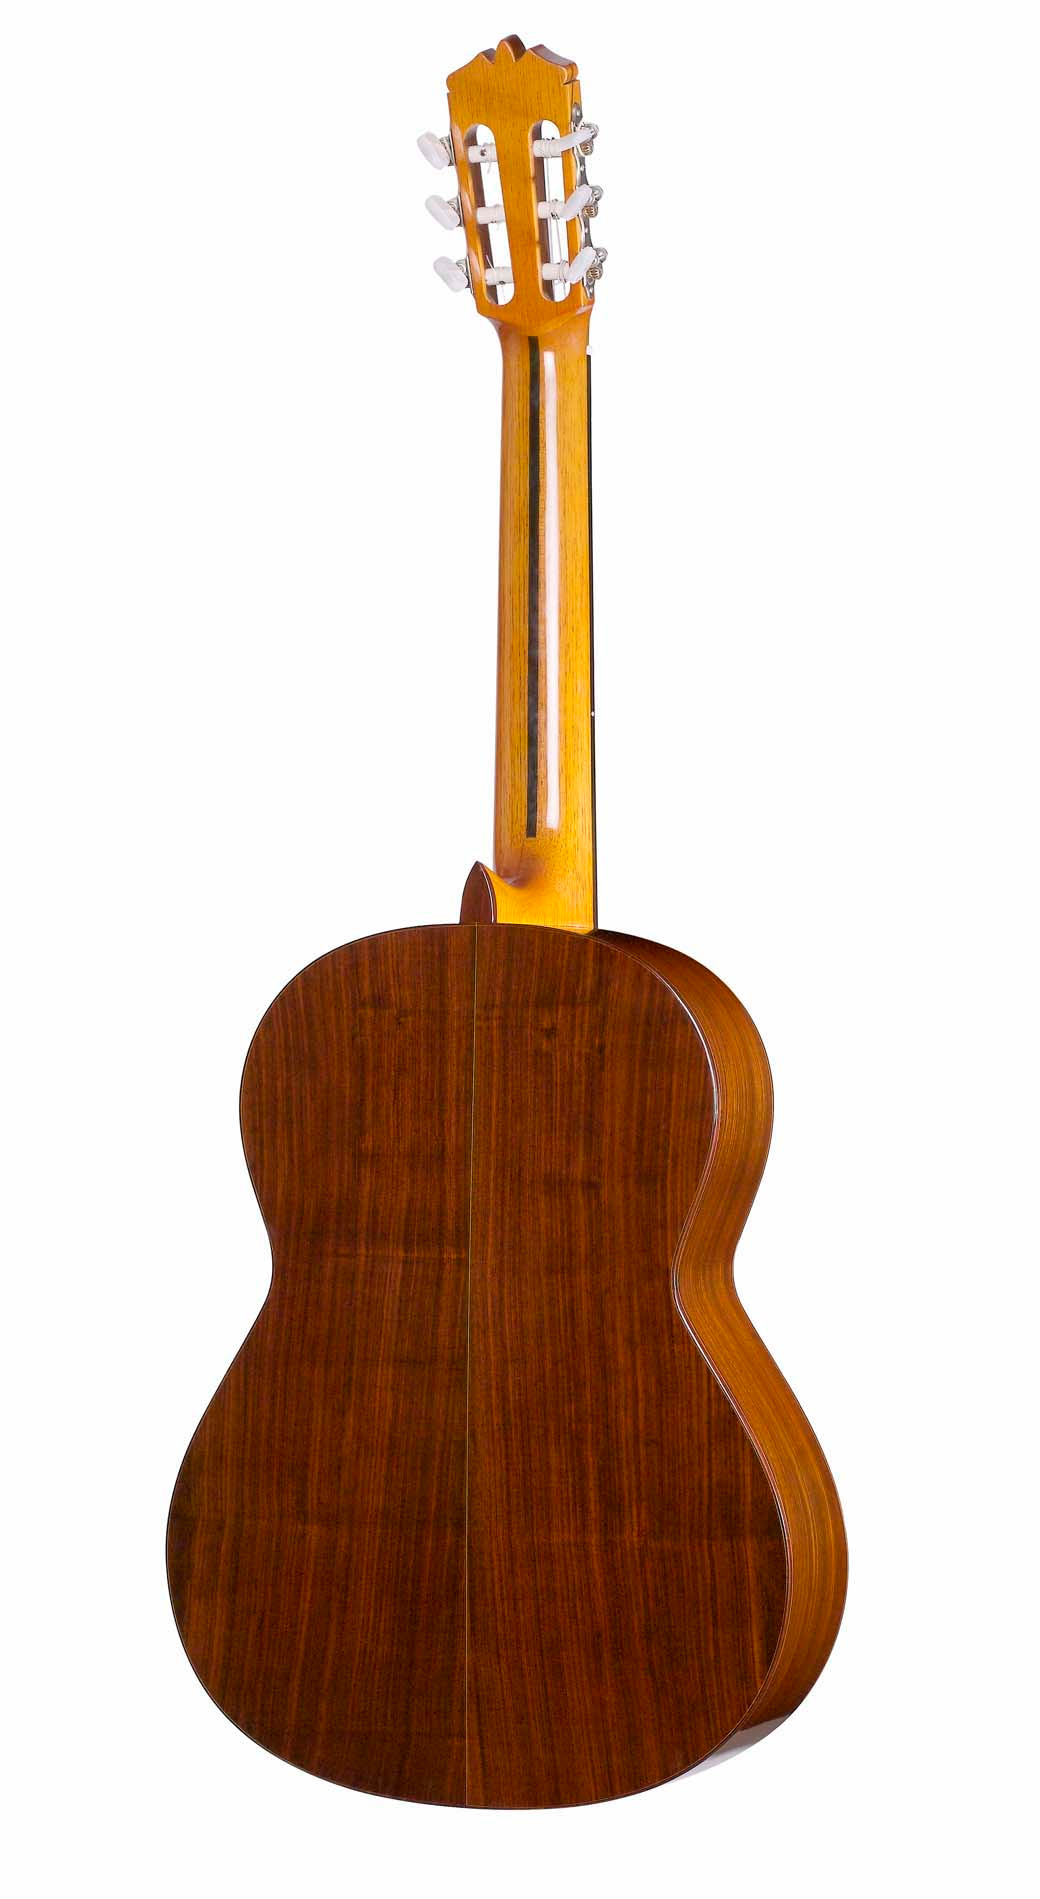 Back of the Classical Prelude handmade guitar